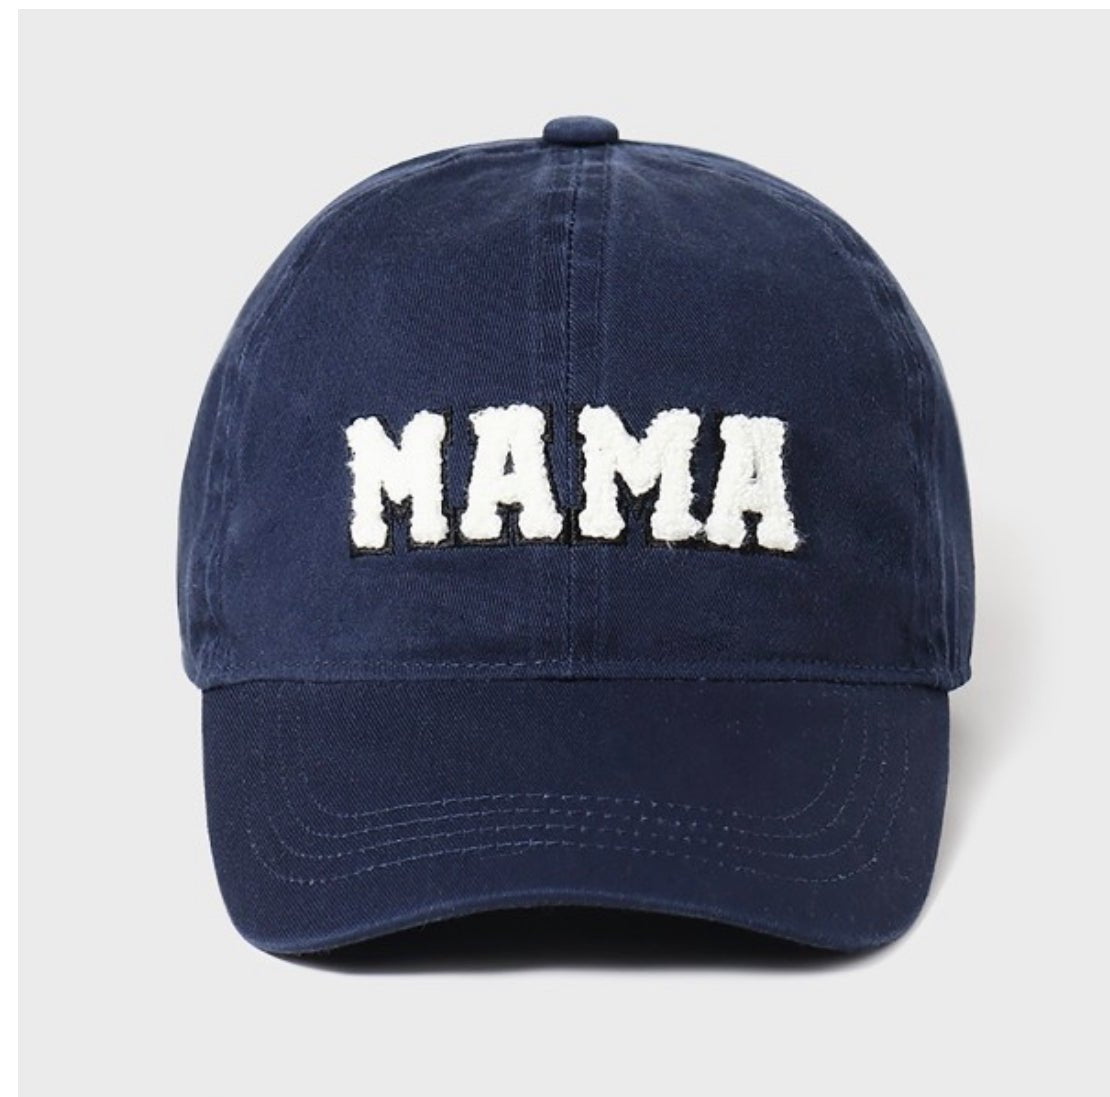 "Mama" Sherpa Lettered Vintage Baseball Cap - Anchor Fusion Boutique